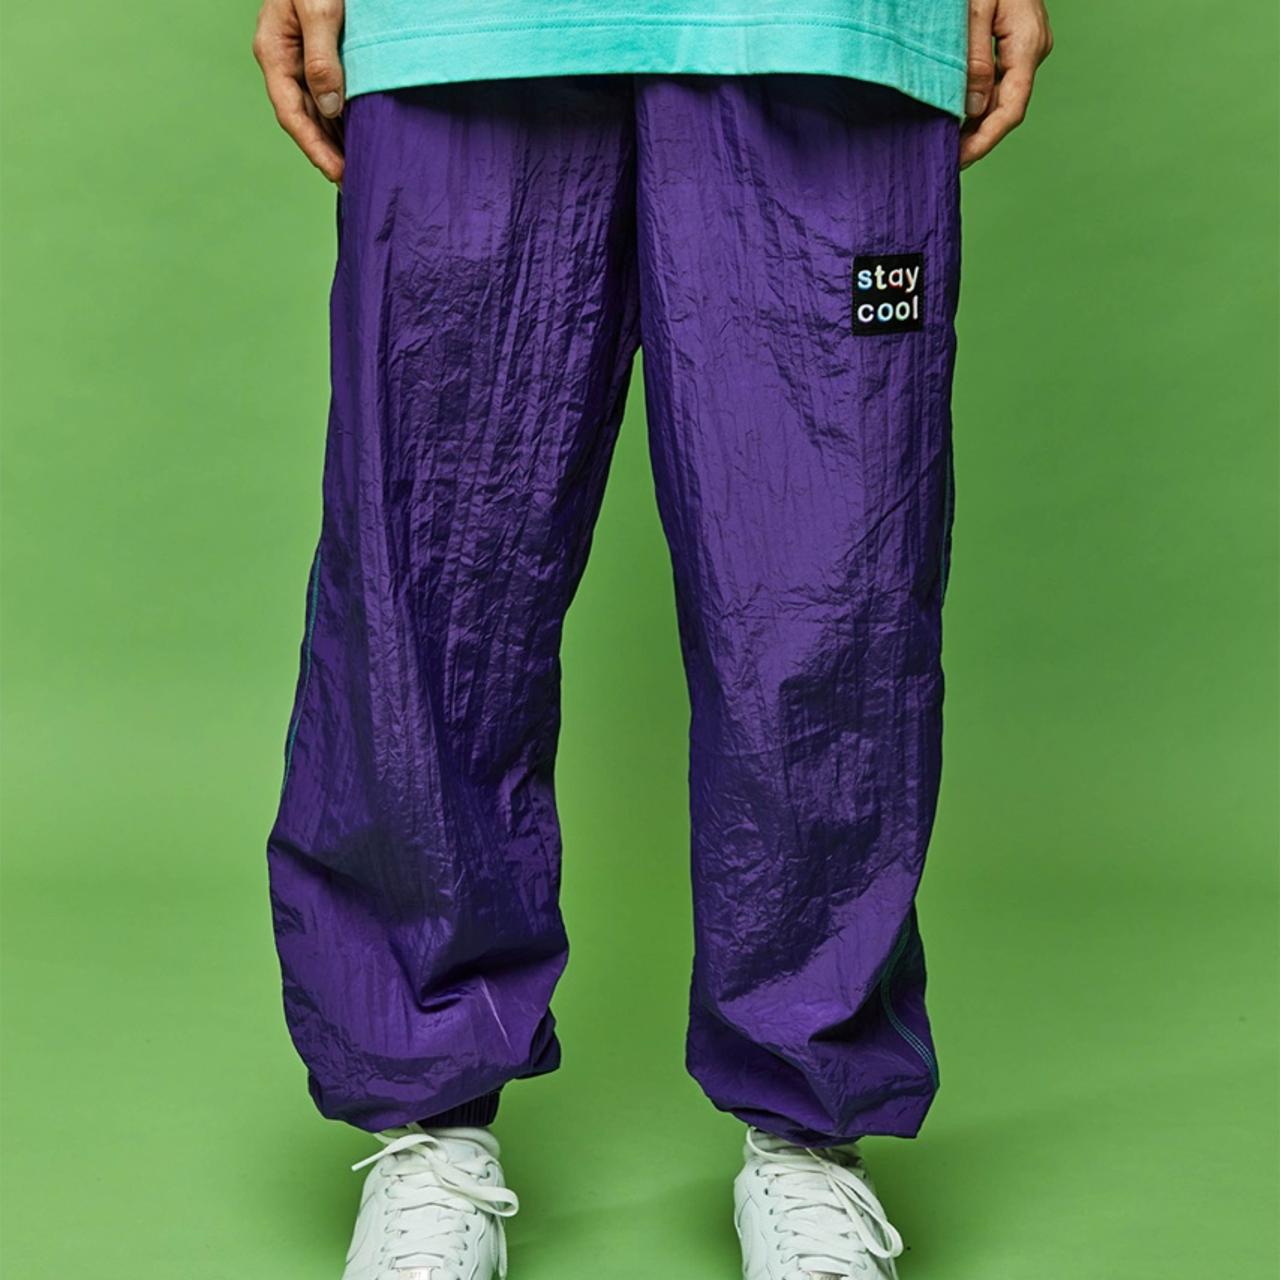 STAY COOL NYC Men's Trousers